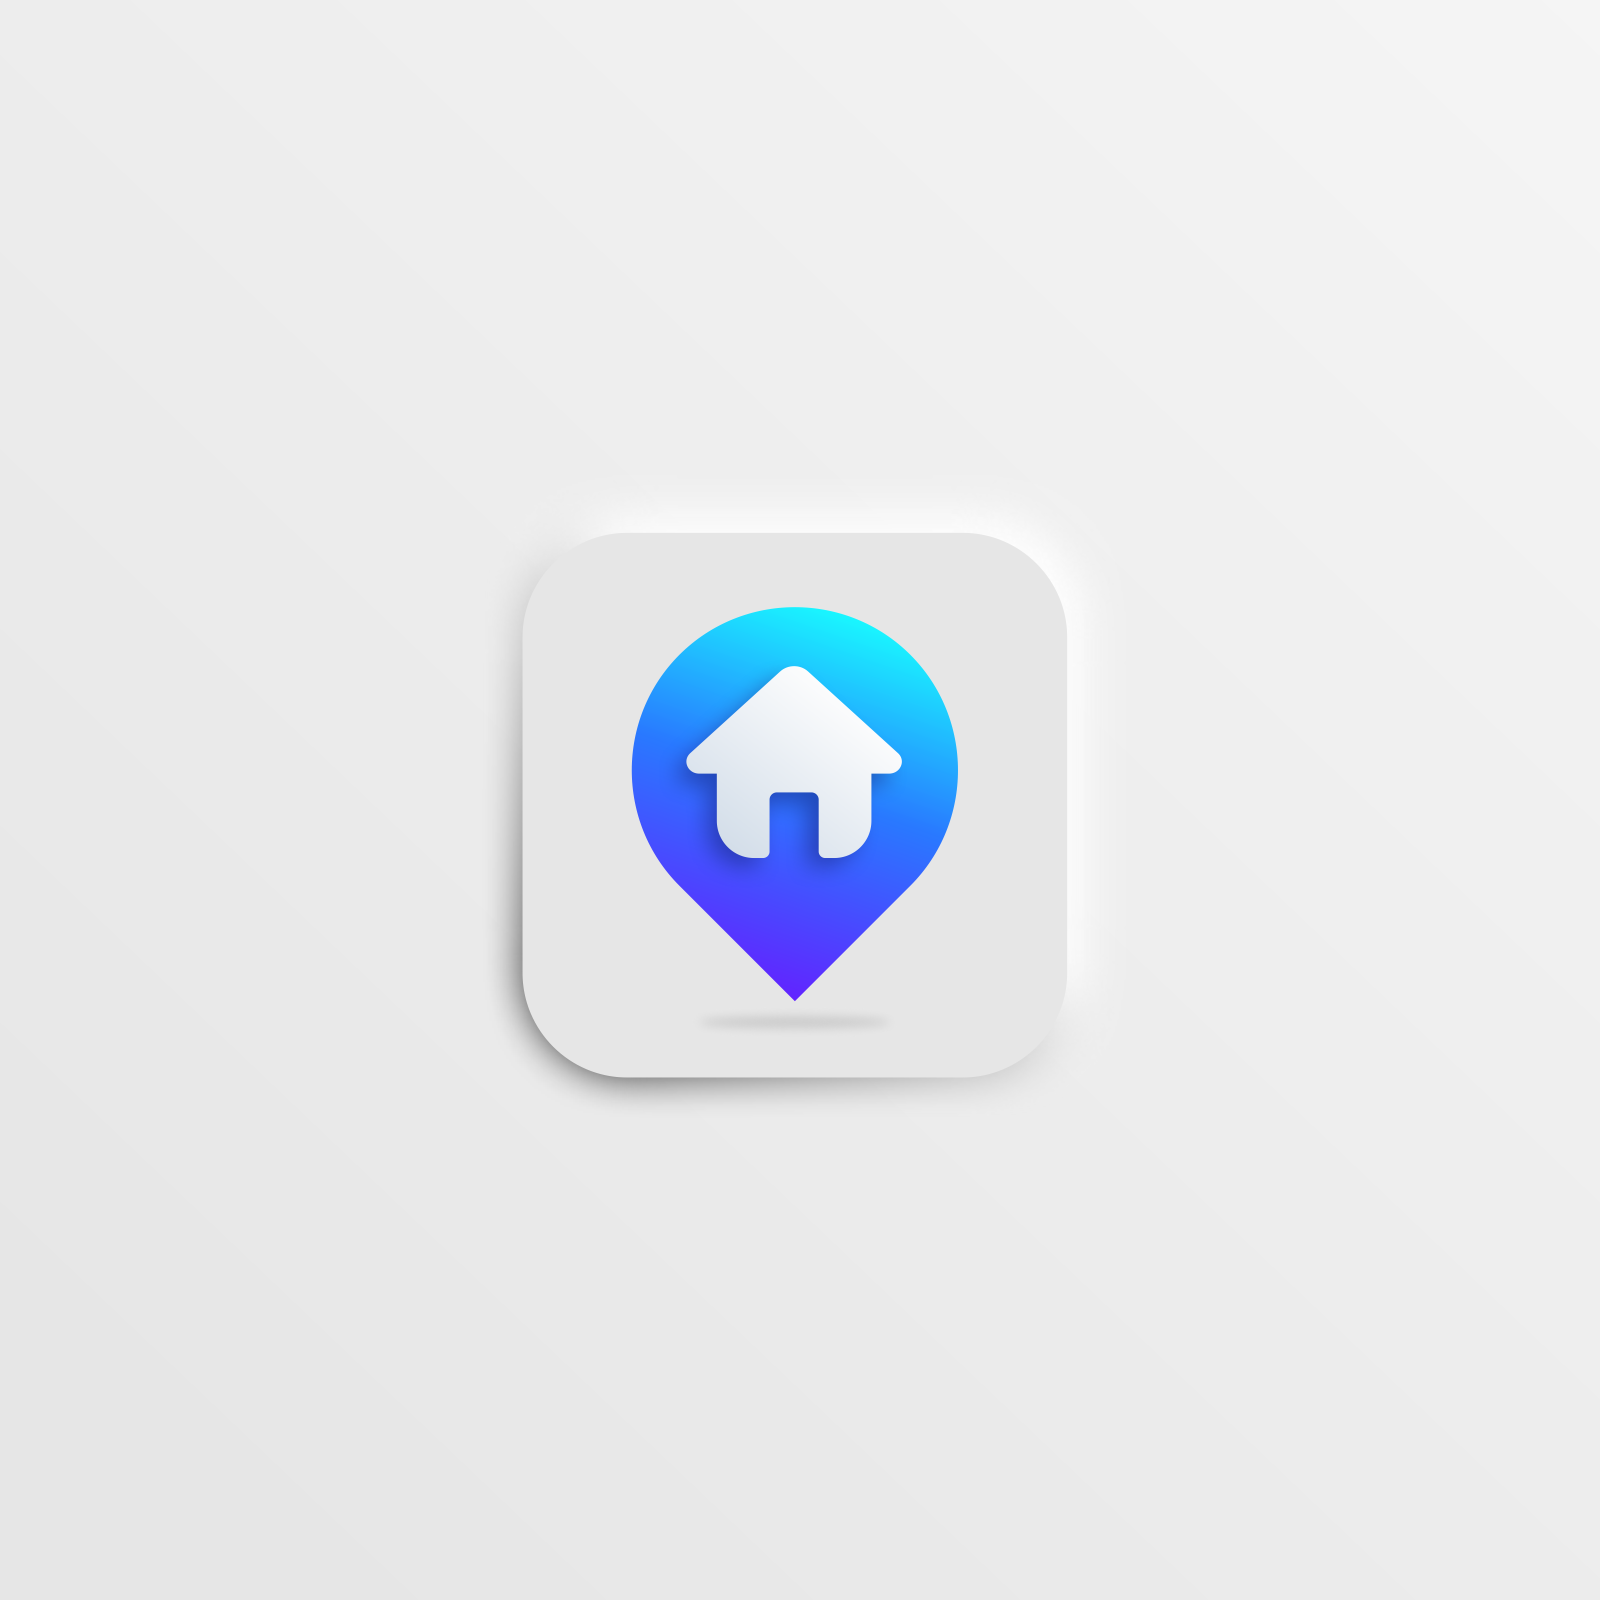 StayCation Logo Icon by Lelevien on Dribbble